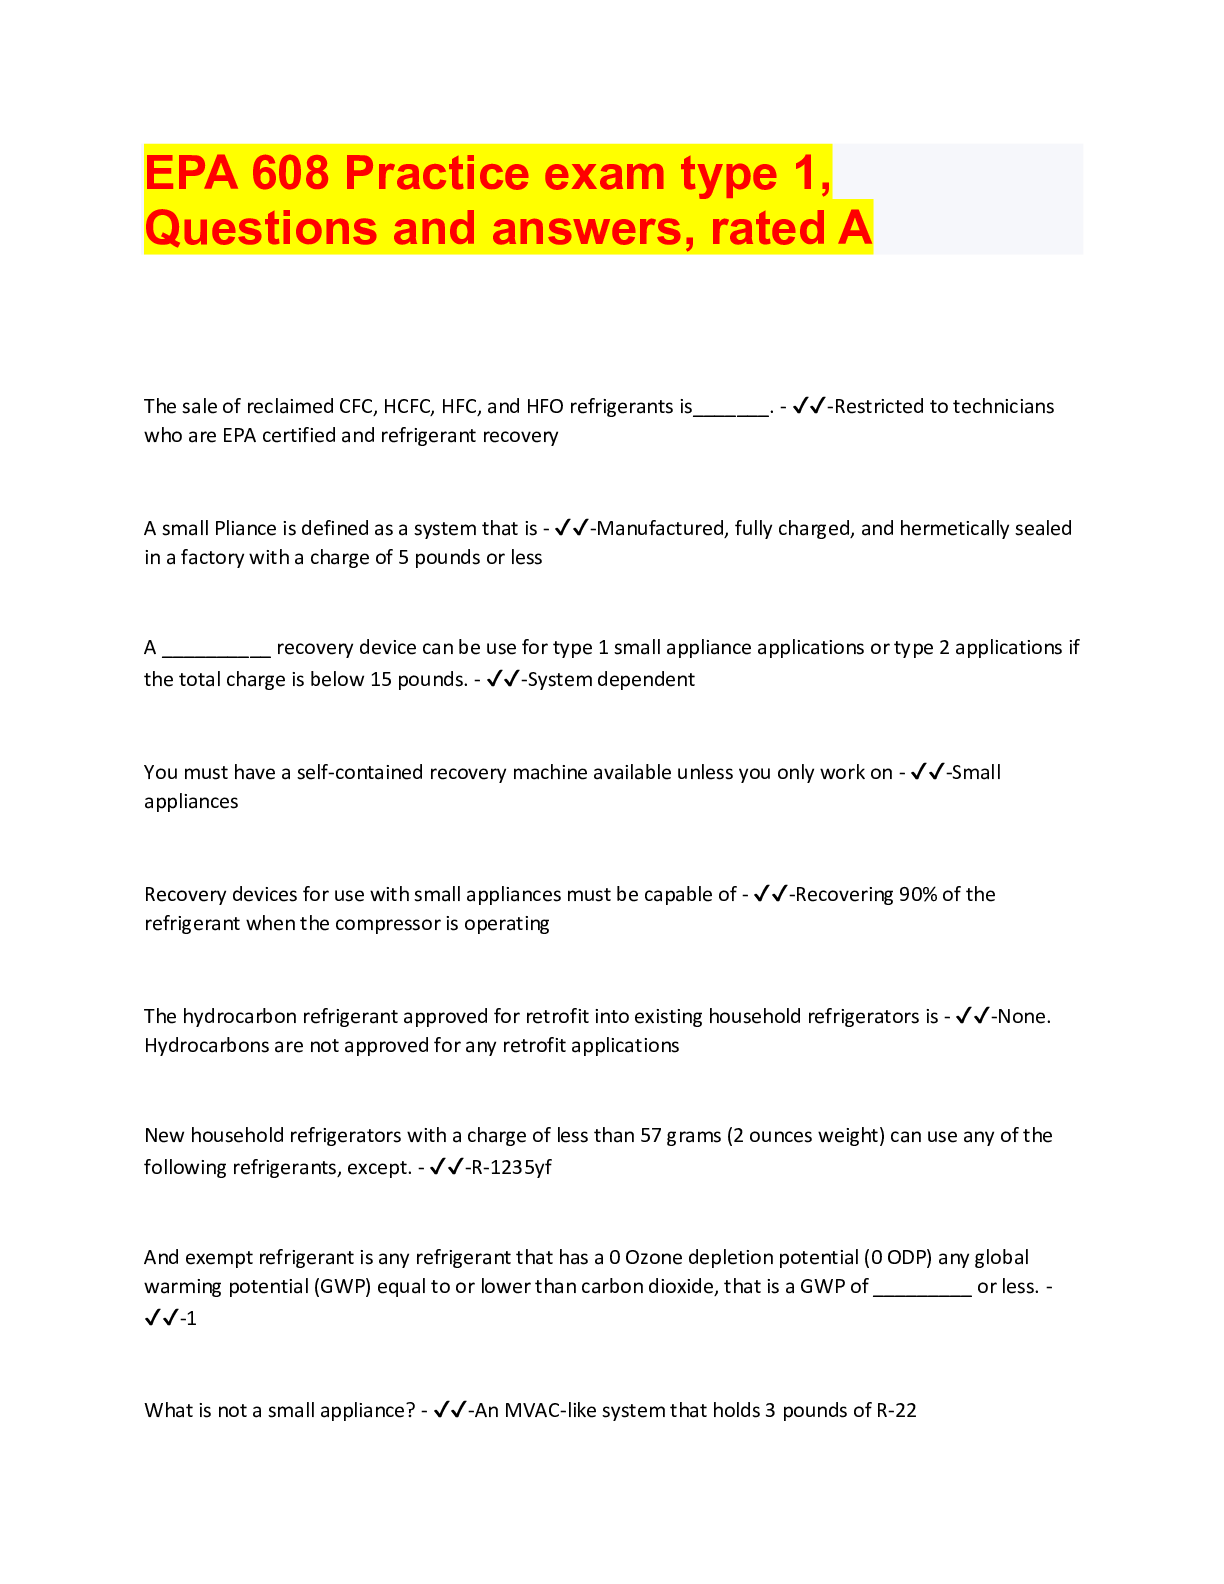 epa-608-questions-and-answers-solution-pack